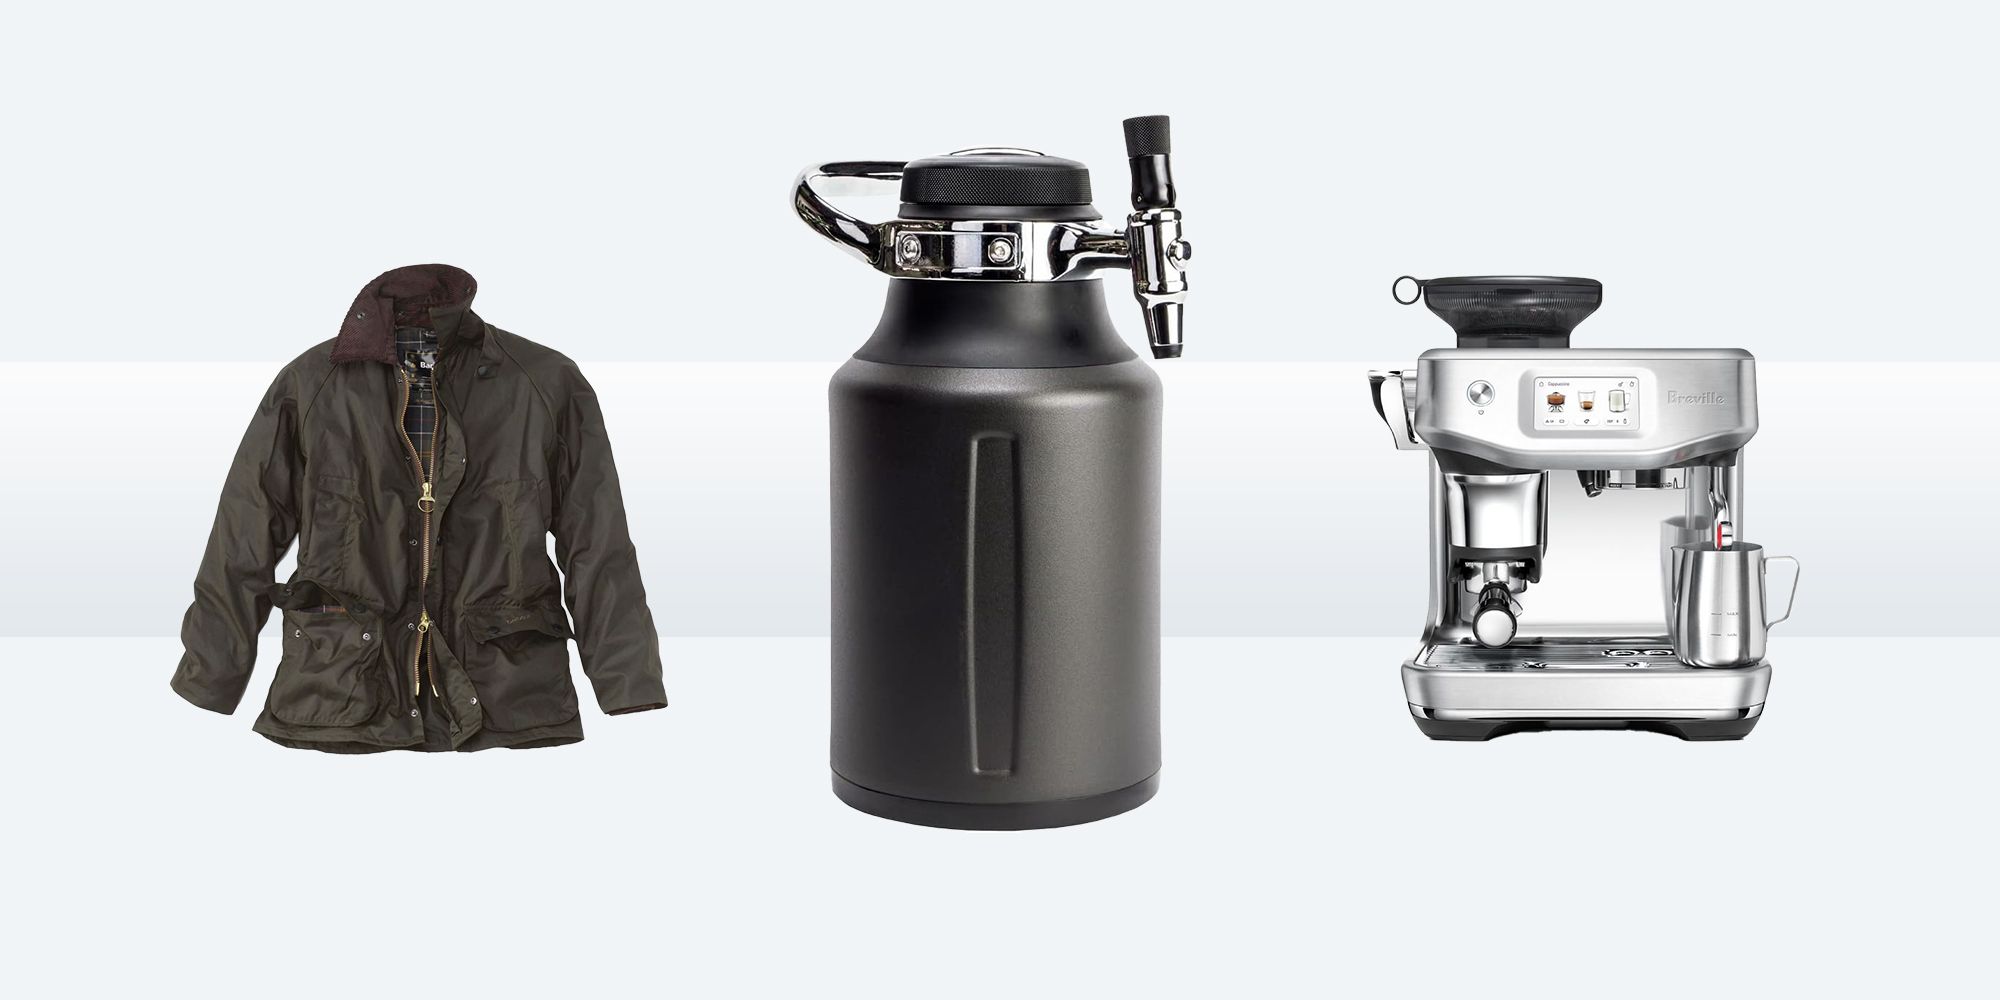 Valentine's Day Gift Guide For Men: 10 Perfect Presents